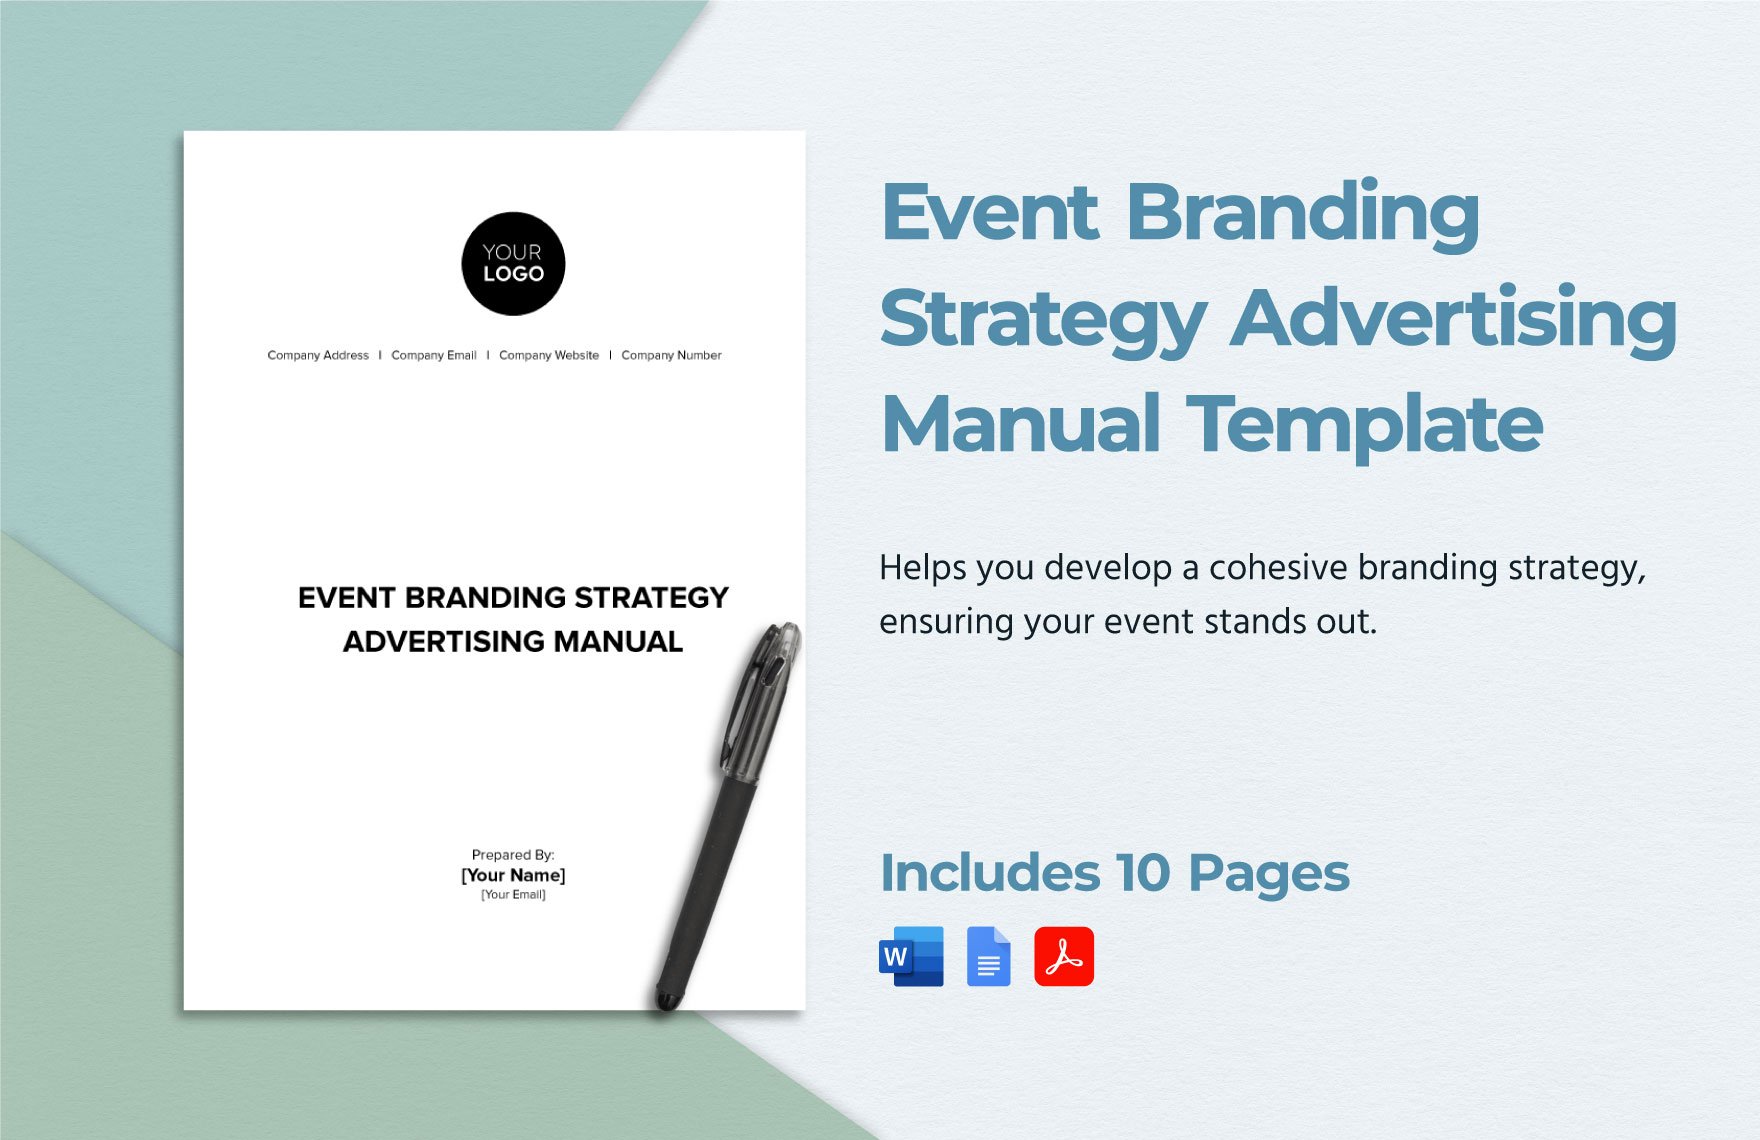 Event Branding Strategy Advertising Manual Template